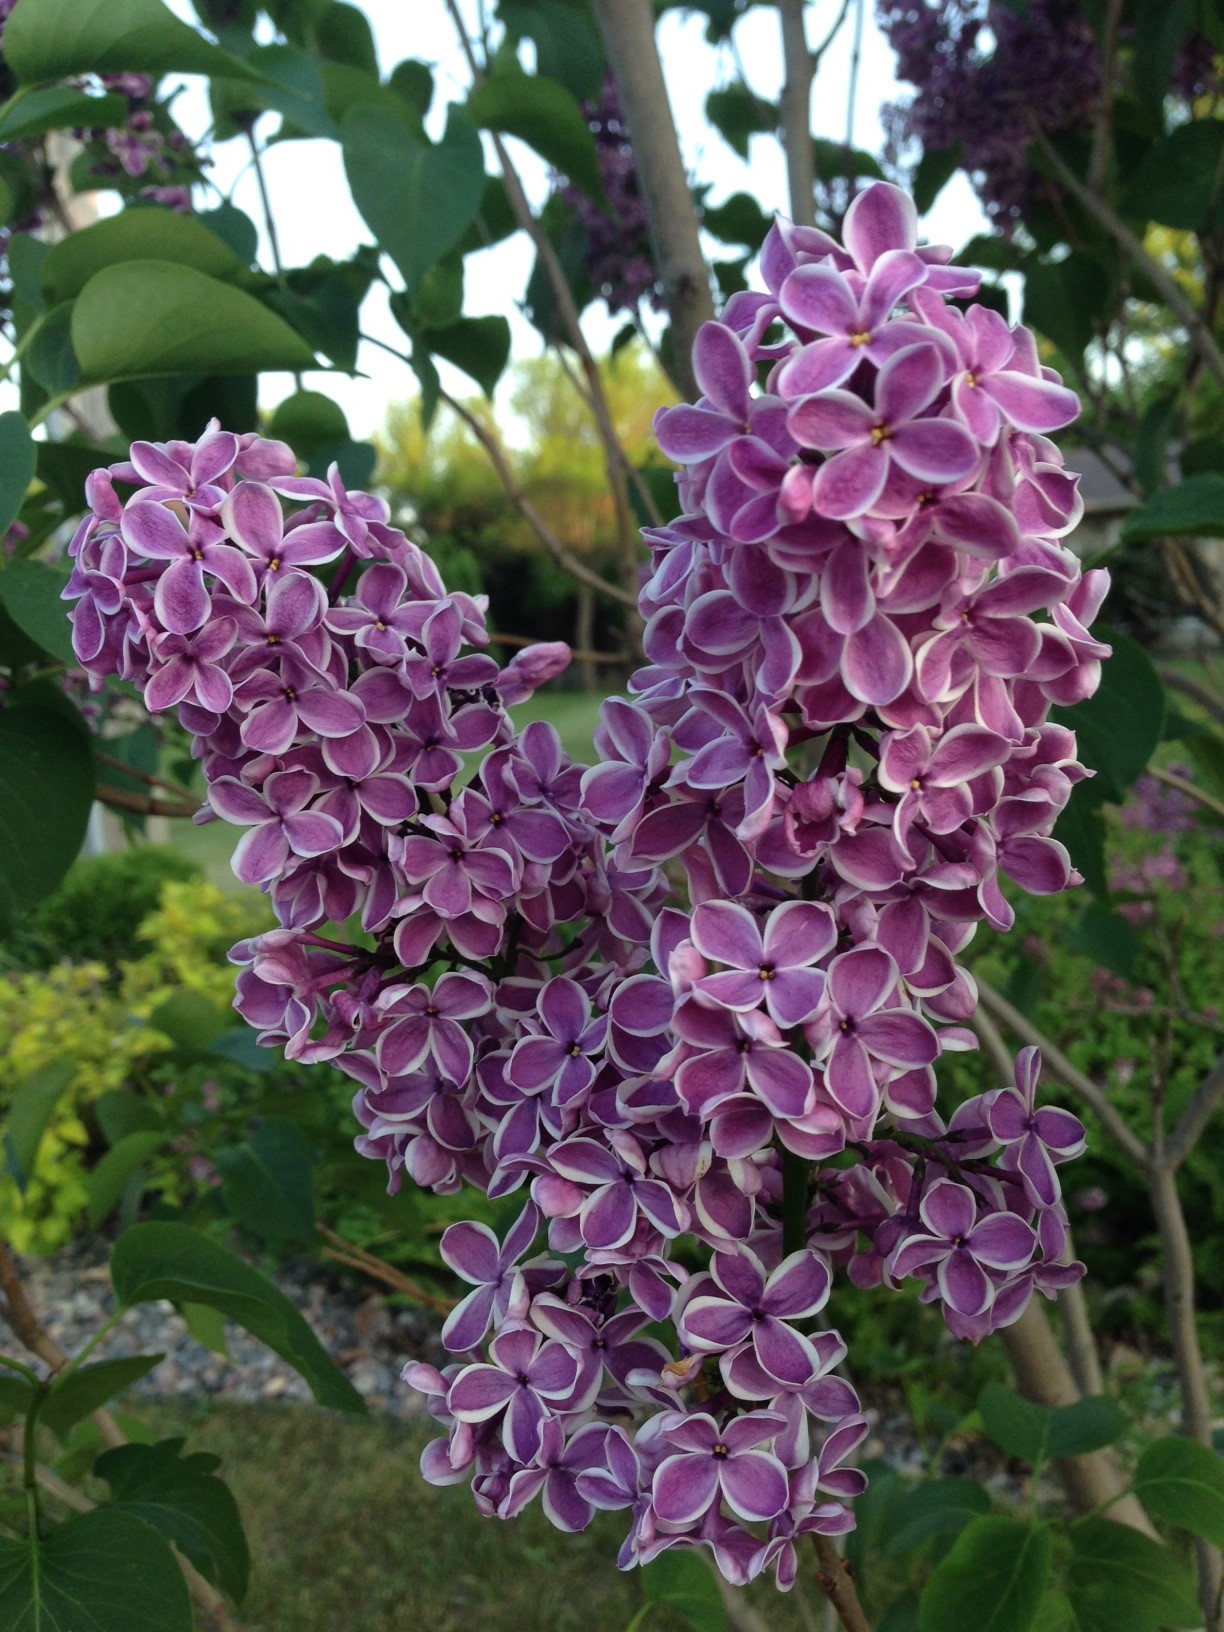 Lilacs are spring-blooming shrubs that produce their flower buds in late summer or early fall in the year preceding the bloom. (NDSU photo)